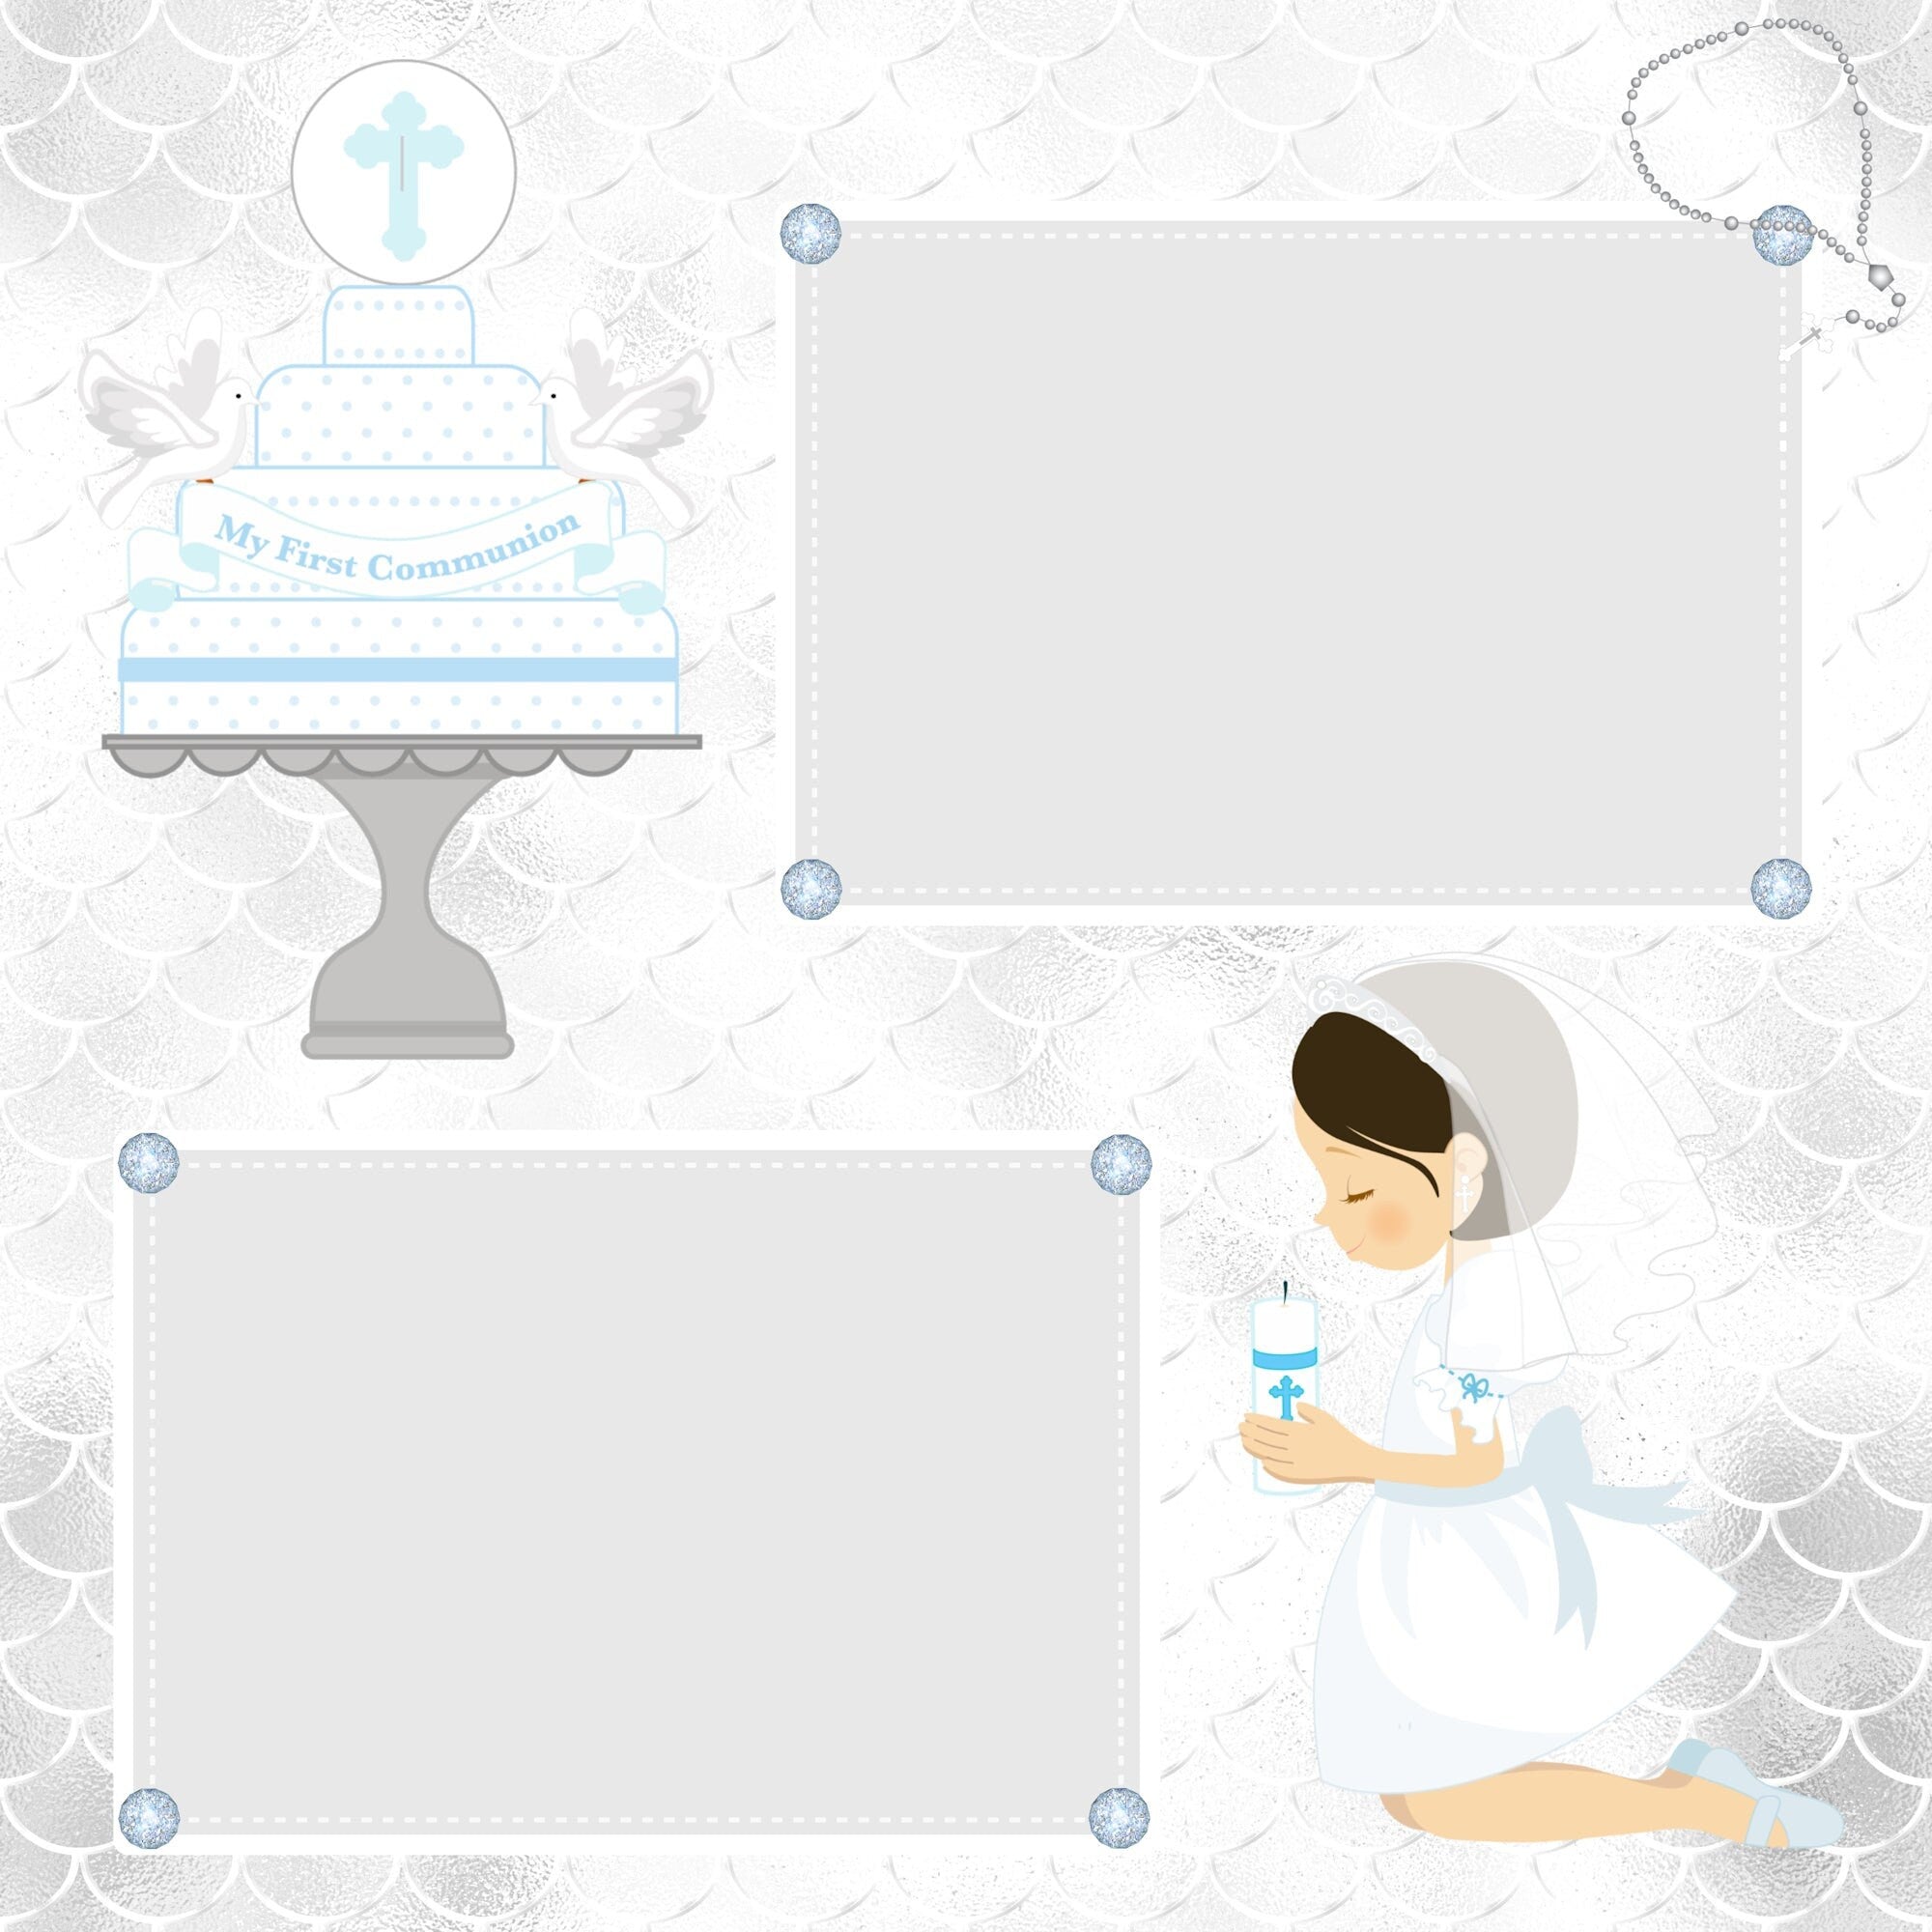 First Communion Girl (2) - 12 x 12 Premade, Printed Scrapbook Pages by SSC Designs